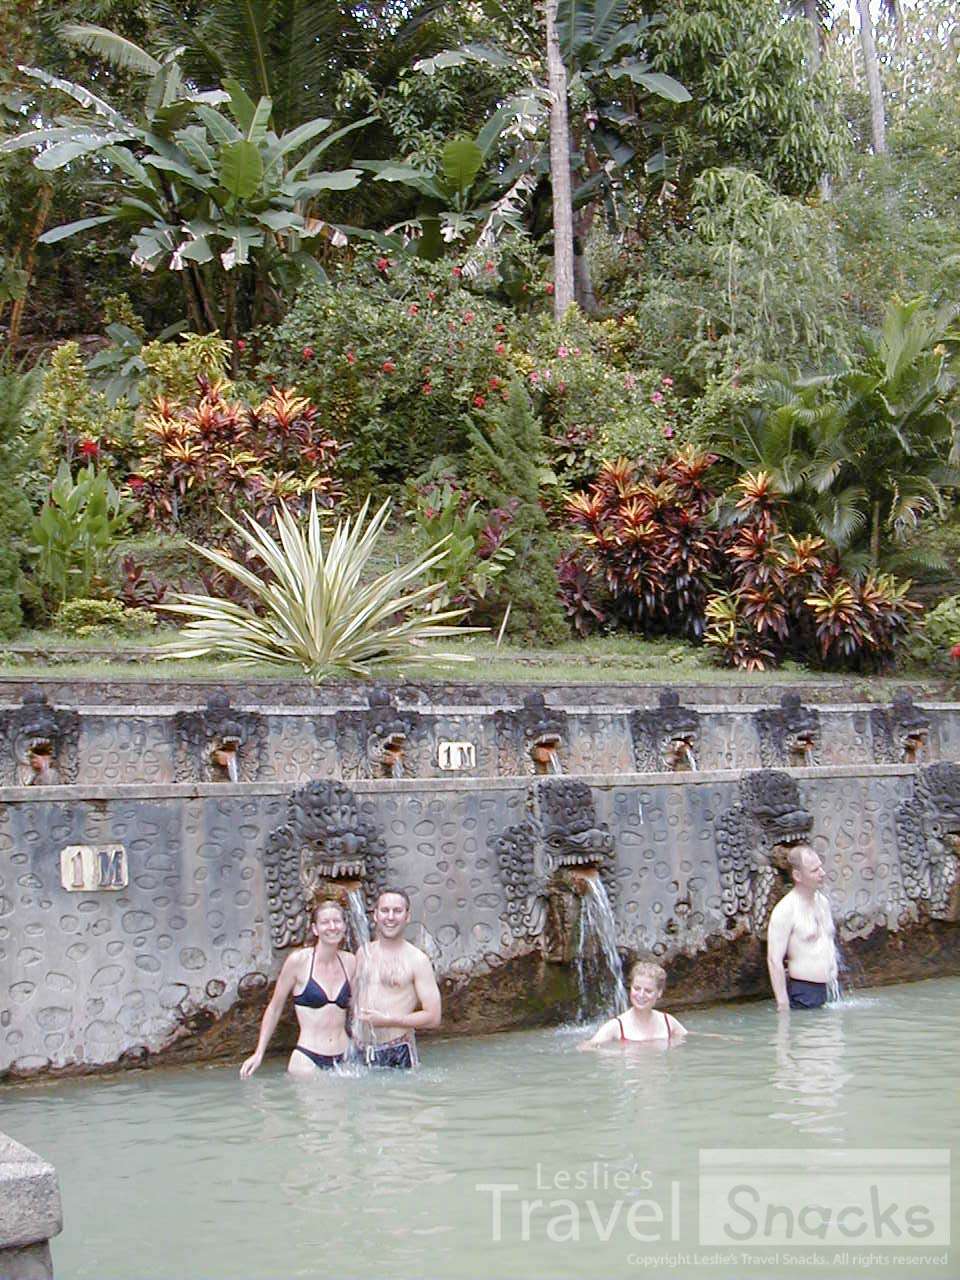 Banjar Hot Springs. The hot water comes out of the mouths of the dragons.